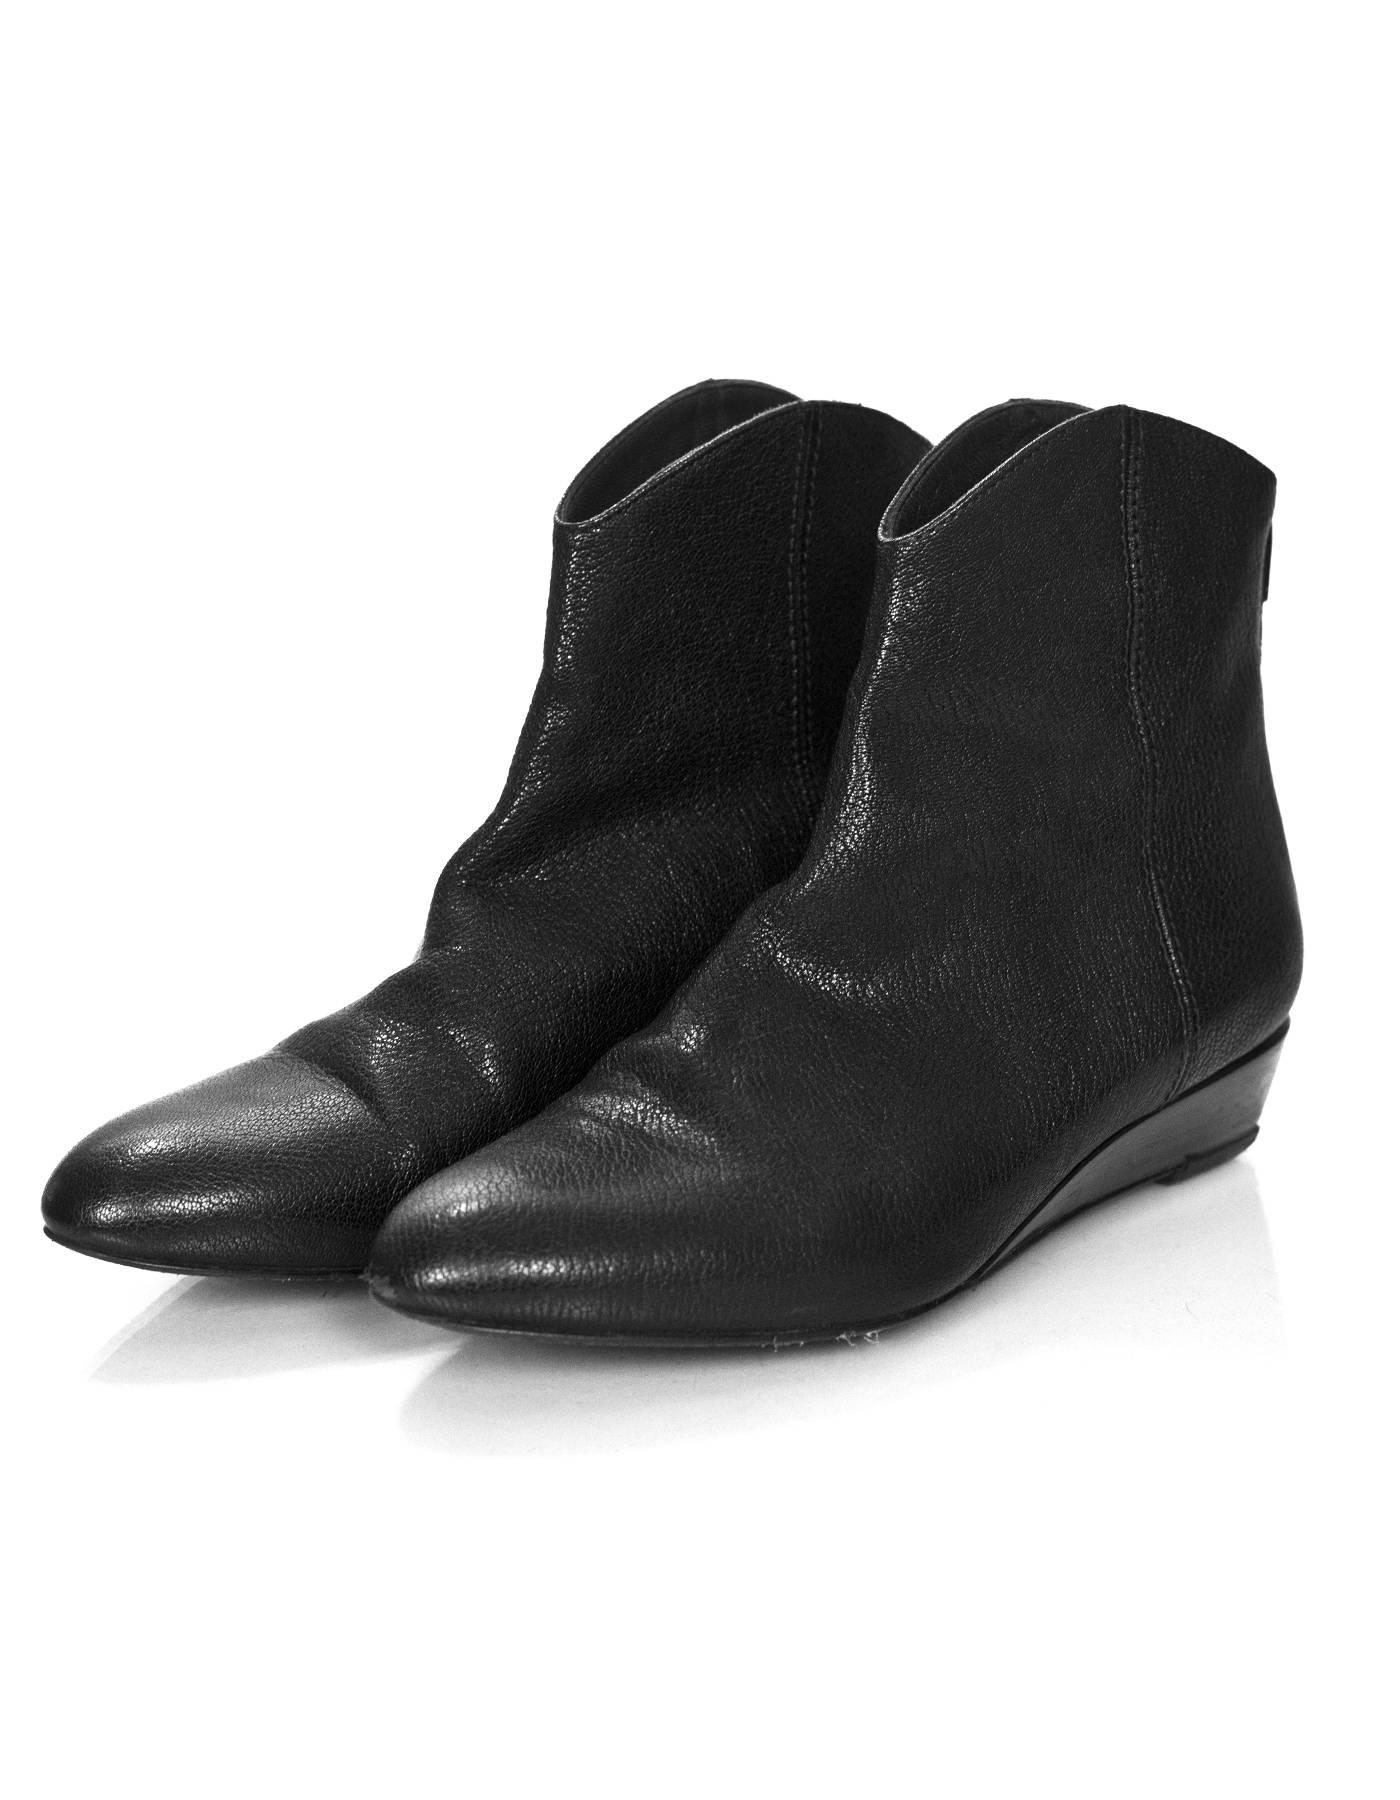 Stuart Weitzman Black Leather Ankle Boots Sz 6

Made In: Spain
Color: Black
Materials: Leather
Closure/Opening: Back zip closure
Sole Stamp: Stuart Weitzman Made in Spain
Overall Condition: Excellent pre-owned condition with the exception of light